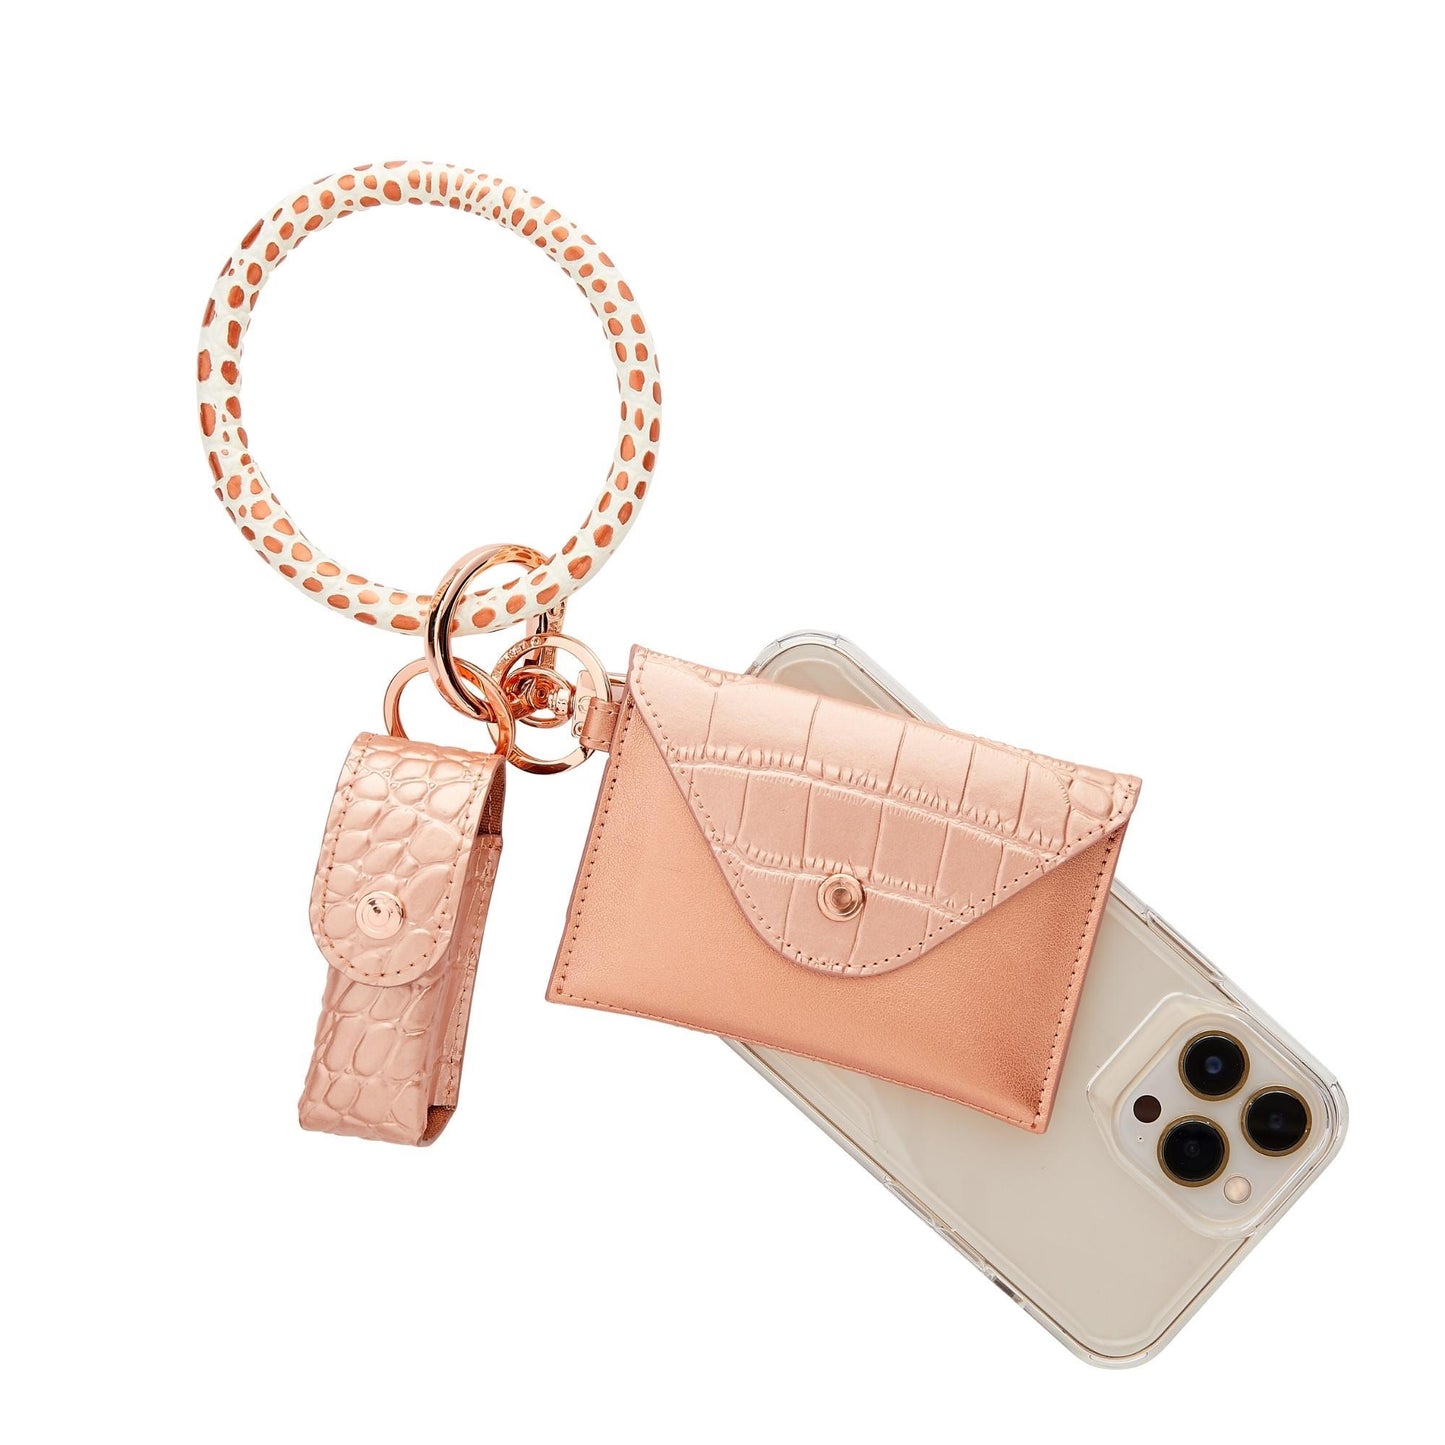 Rose Gold - The Hook Me Up™ Universal Phone Connector by Oventure with an attached lipstick holder in rose gold leather and mini wallet in rose gold leather